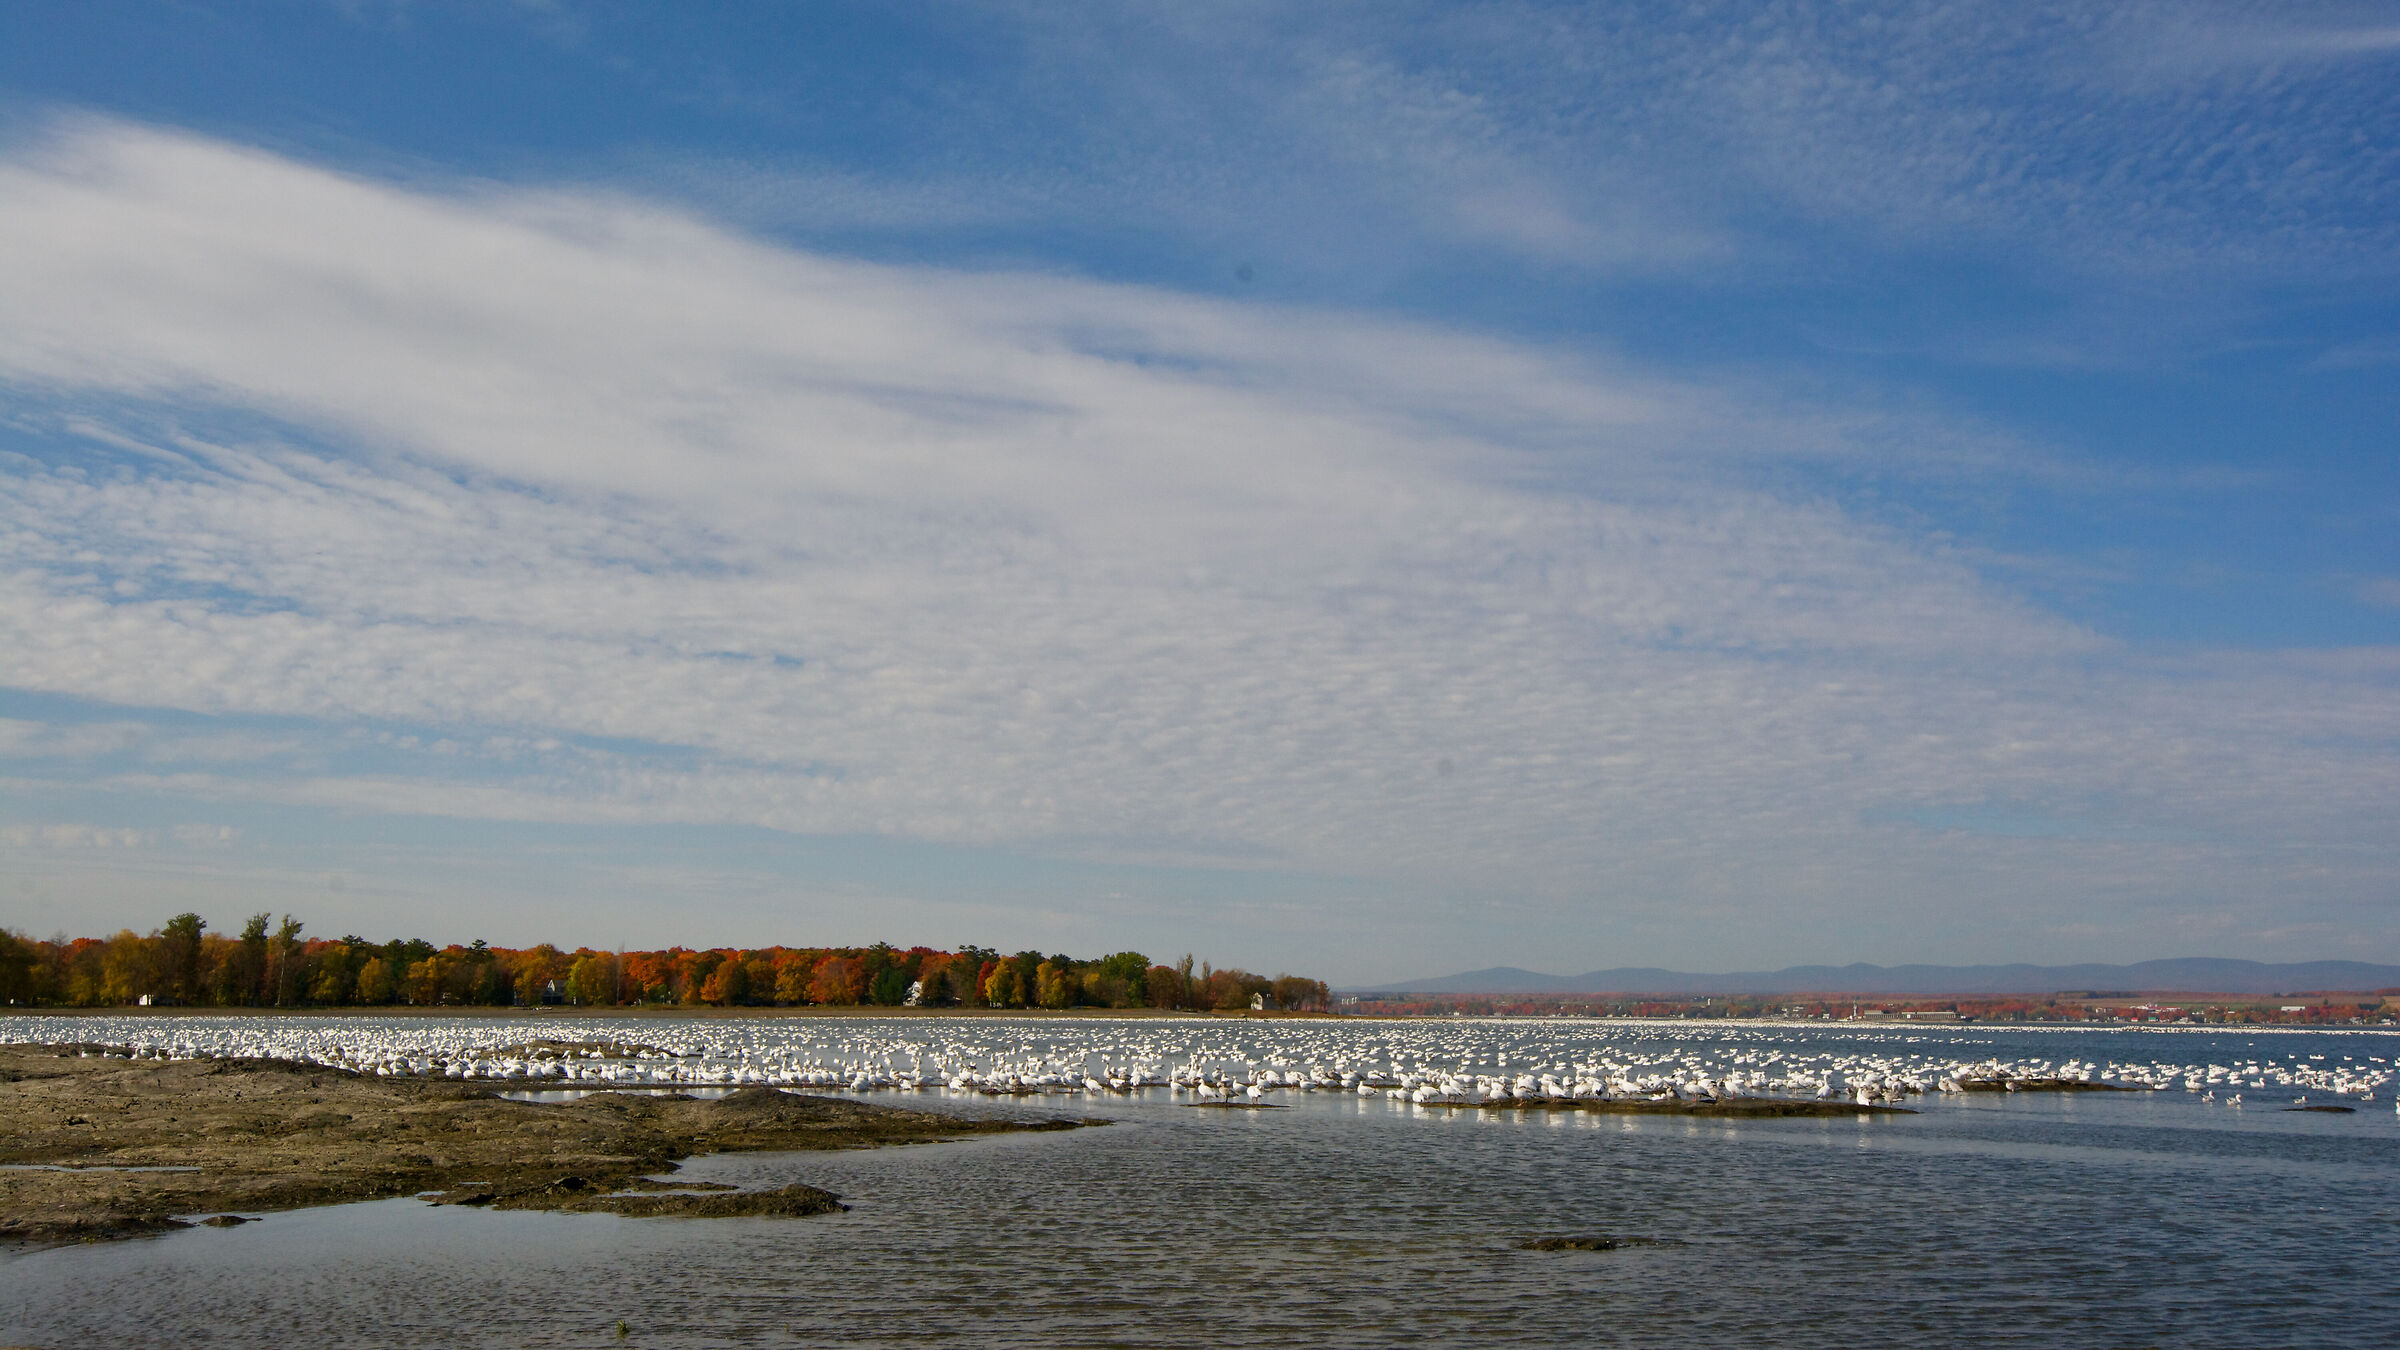 A carpet of geese on the St. Lawrence River...